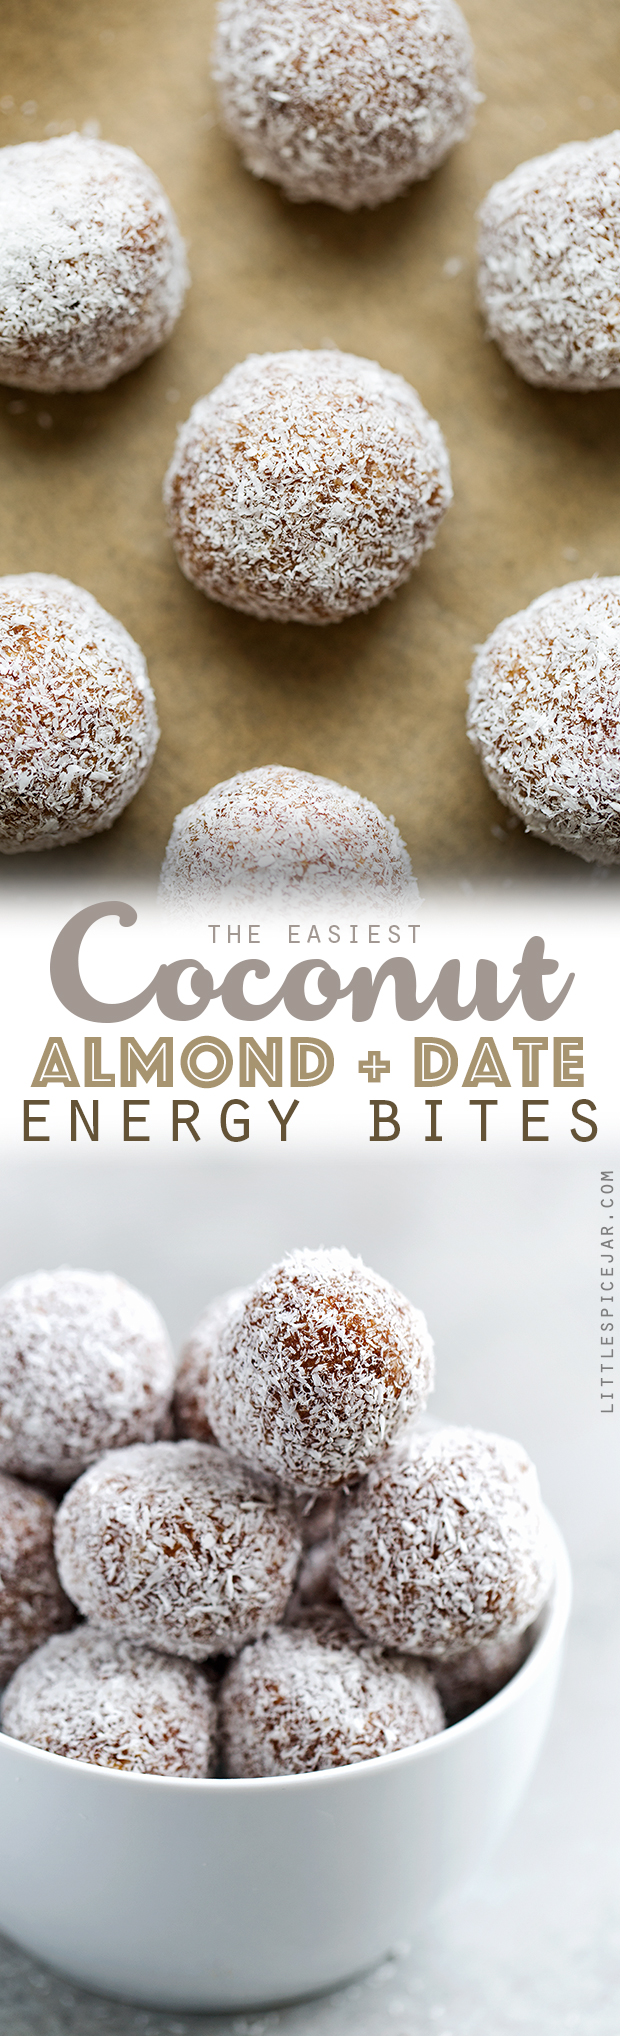 Coconut Almond Energy Bites - These energy bites are made with just 5 simple ingredients. They're crunchy, salty, and sweet and are perfect for a mid-day snack! #energybites #energyballs #refinedsugarfree | Littlespicejar.com